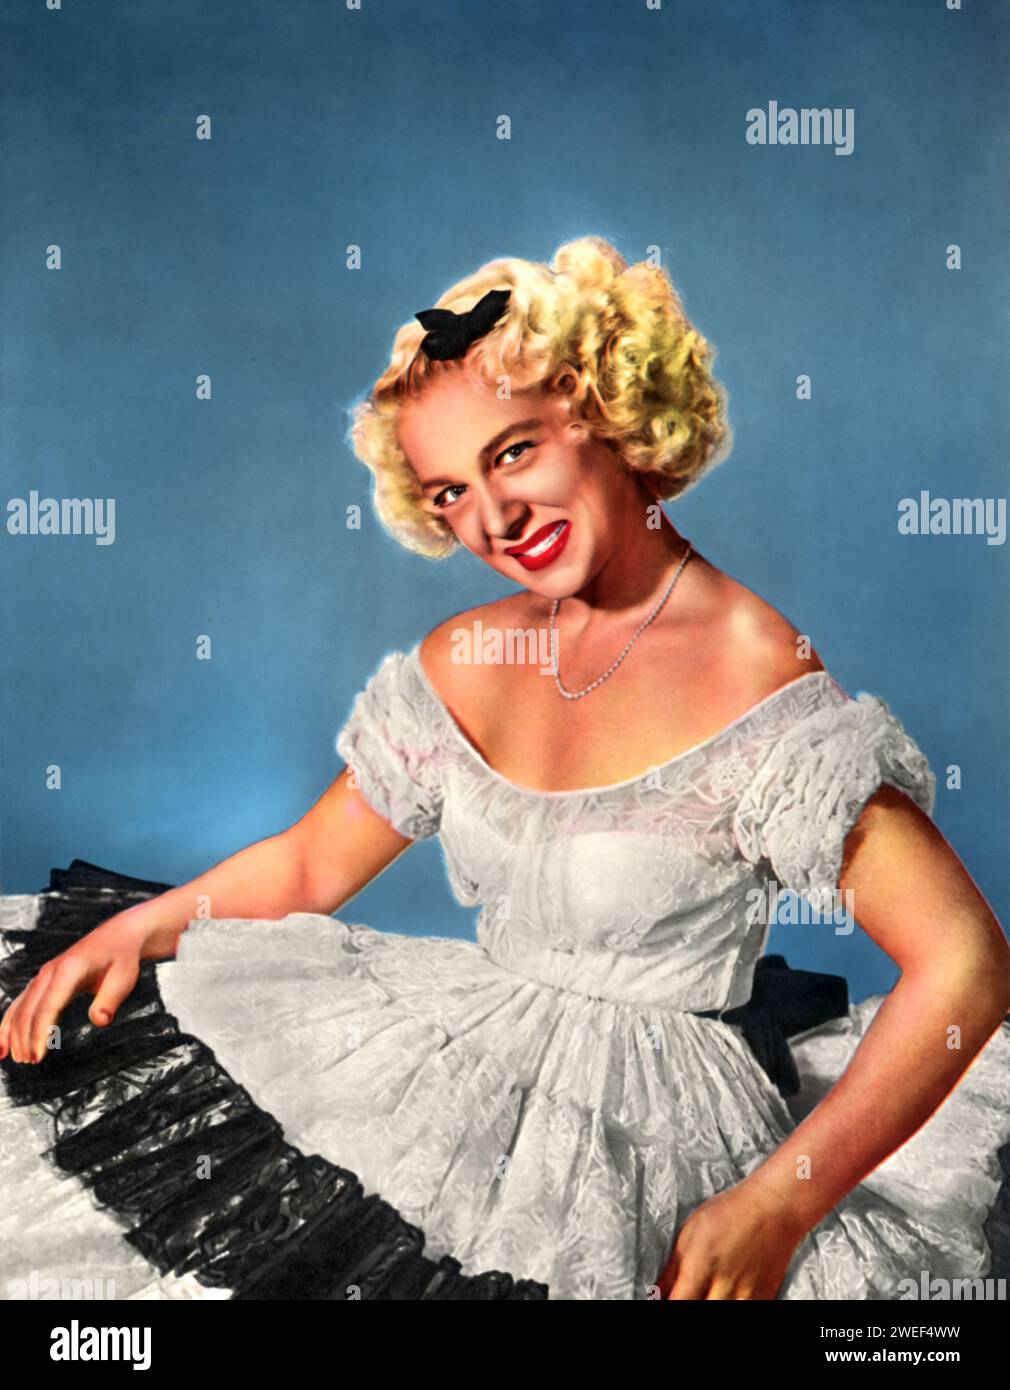 A portrait of Betty Hutton, an actress and star celebrated for her dynamic role in 'Annie Get Your Gun' (1950). Known for her energetic screen presence and powerful singing voice, Hutton brought to life the character of sharpshooter Annie Oakley in this popular musical. Stock Photo